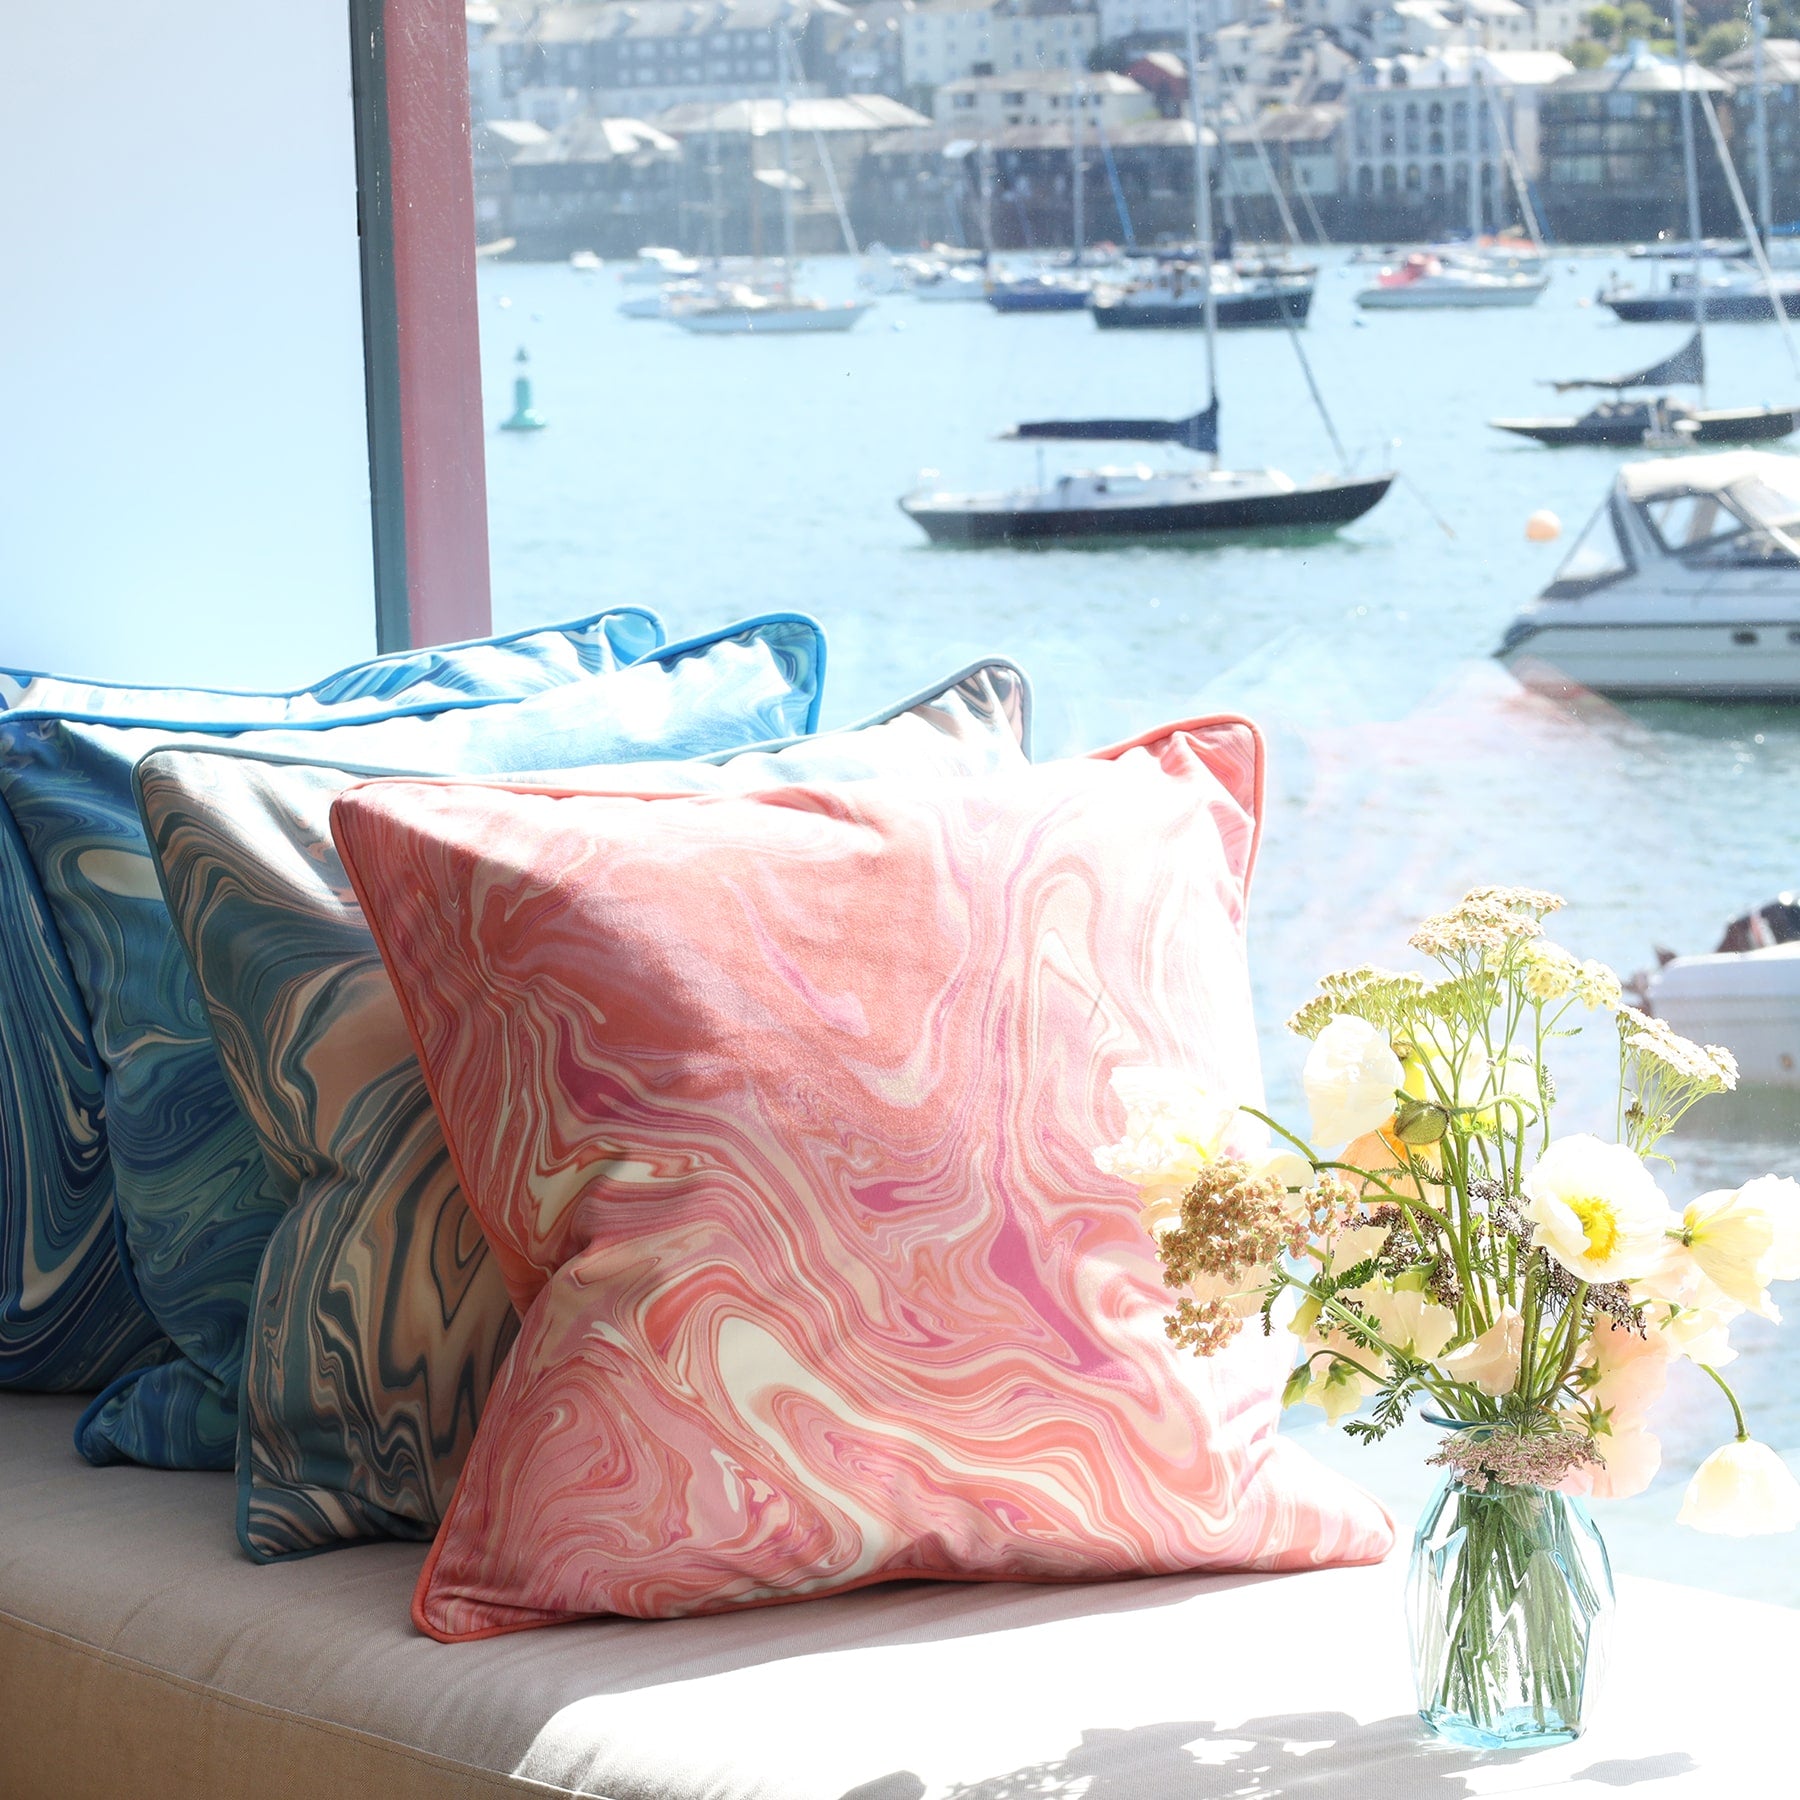 Marble,swirl cushion in Sundowner colours in pinks/whites and coral placed next to similar design in blues.All on a window seat with the sea and boats in the background